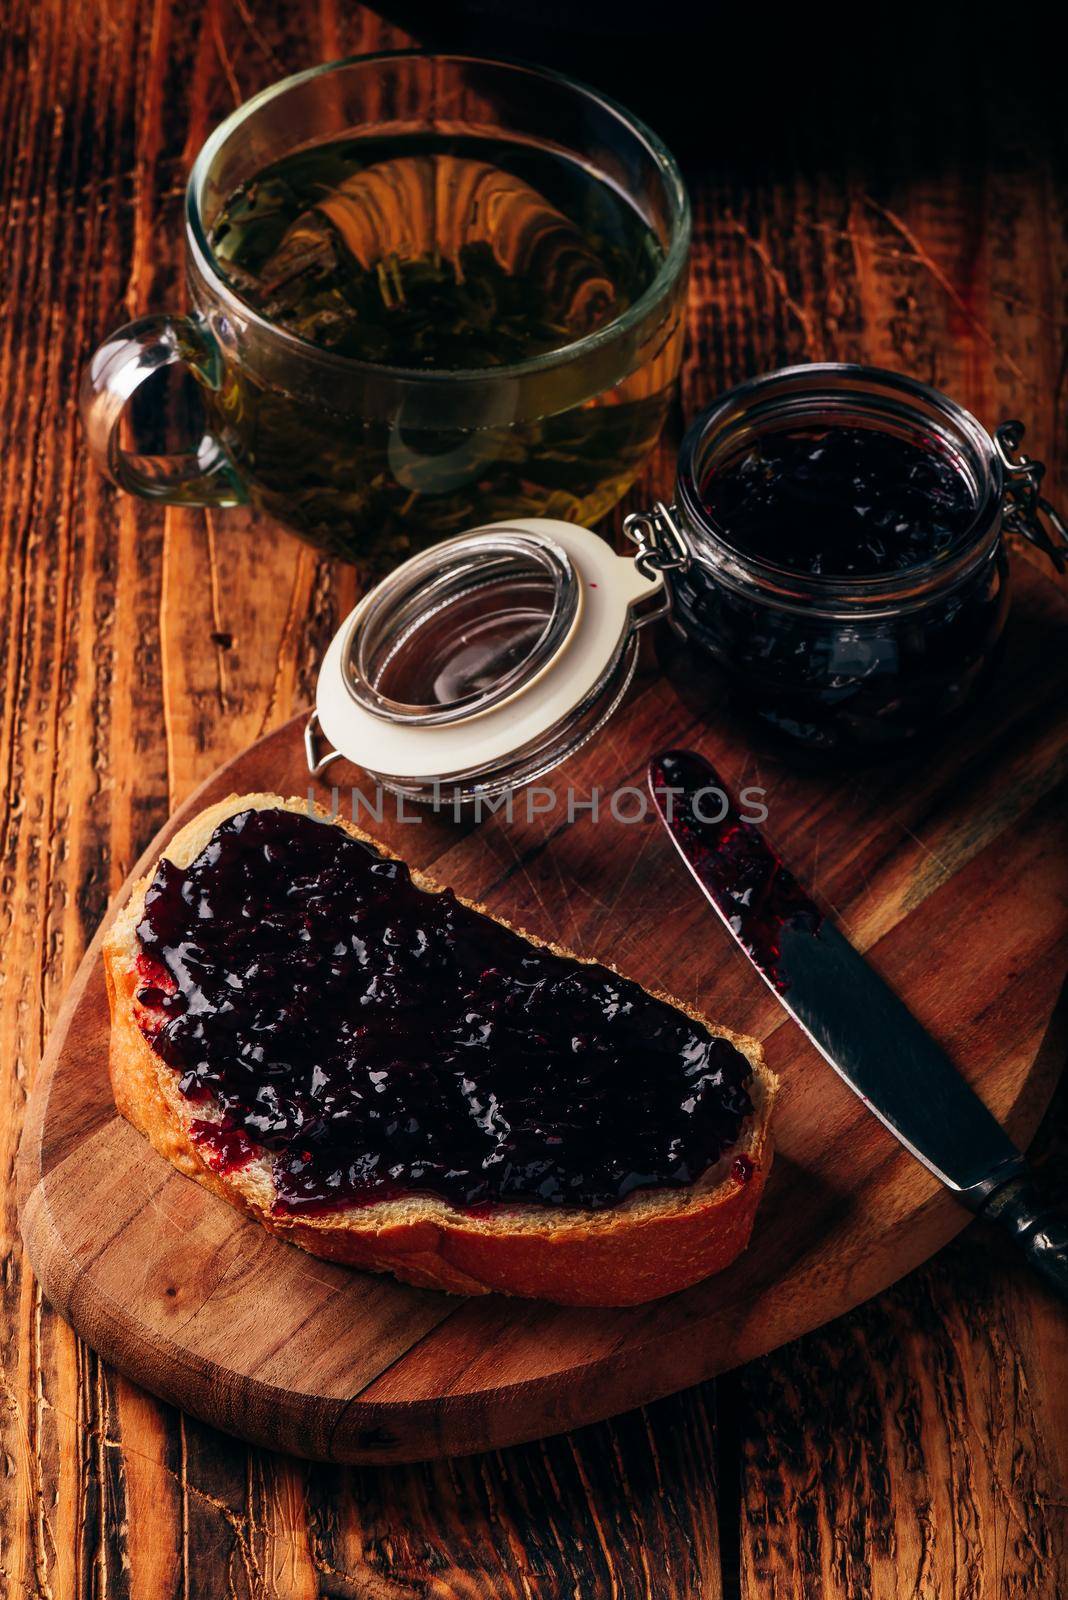 Toast with berry jam and green tea by Seva_blsv